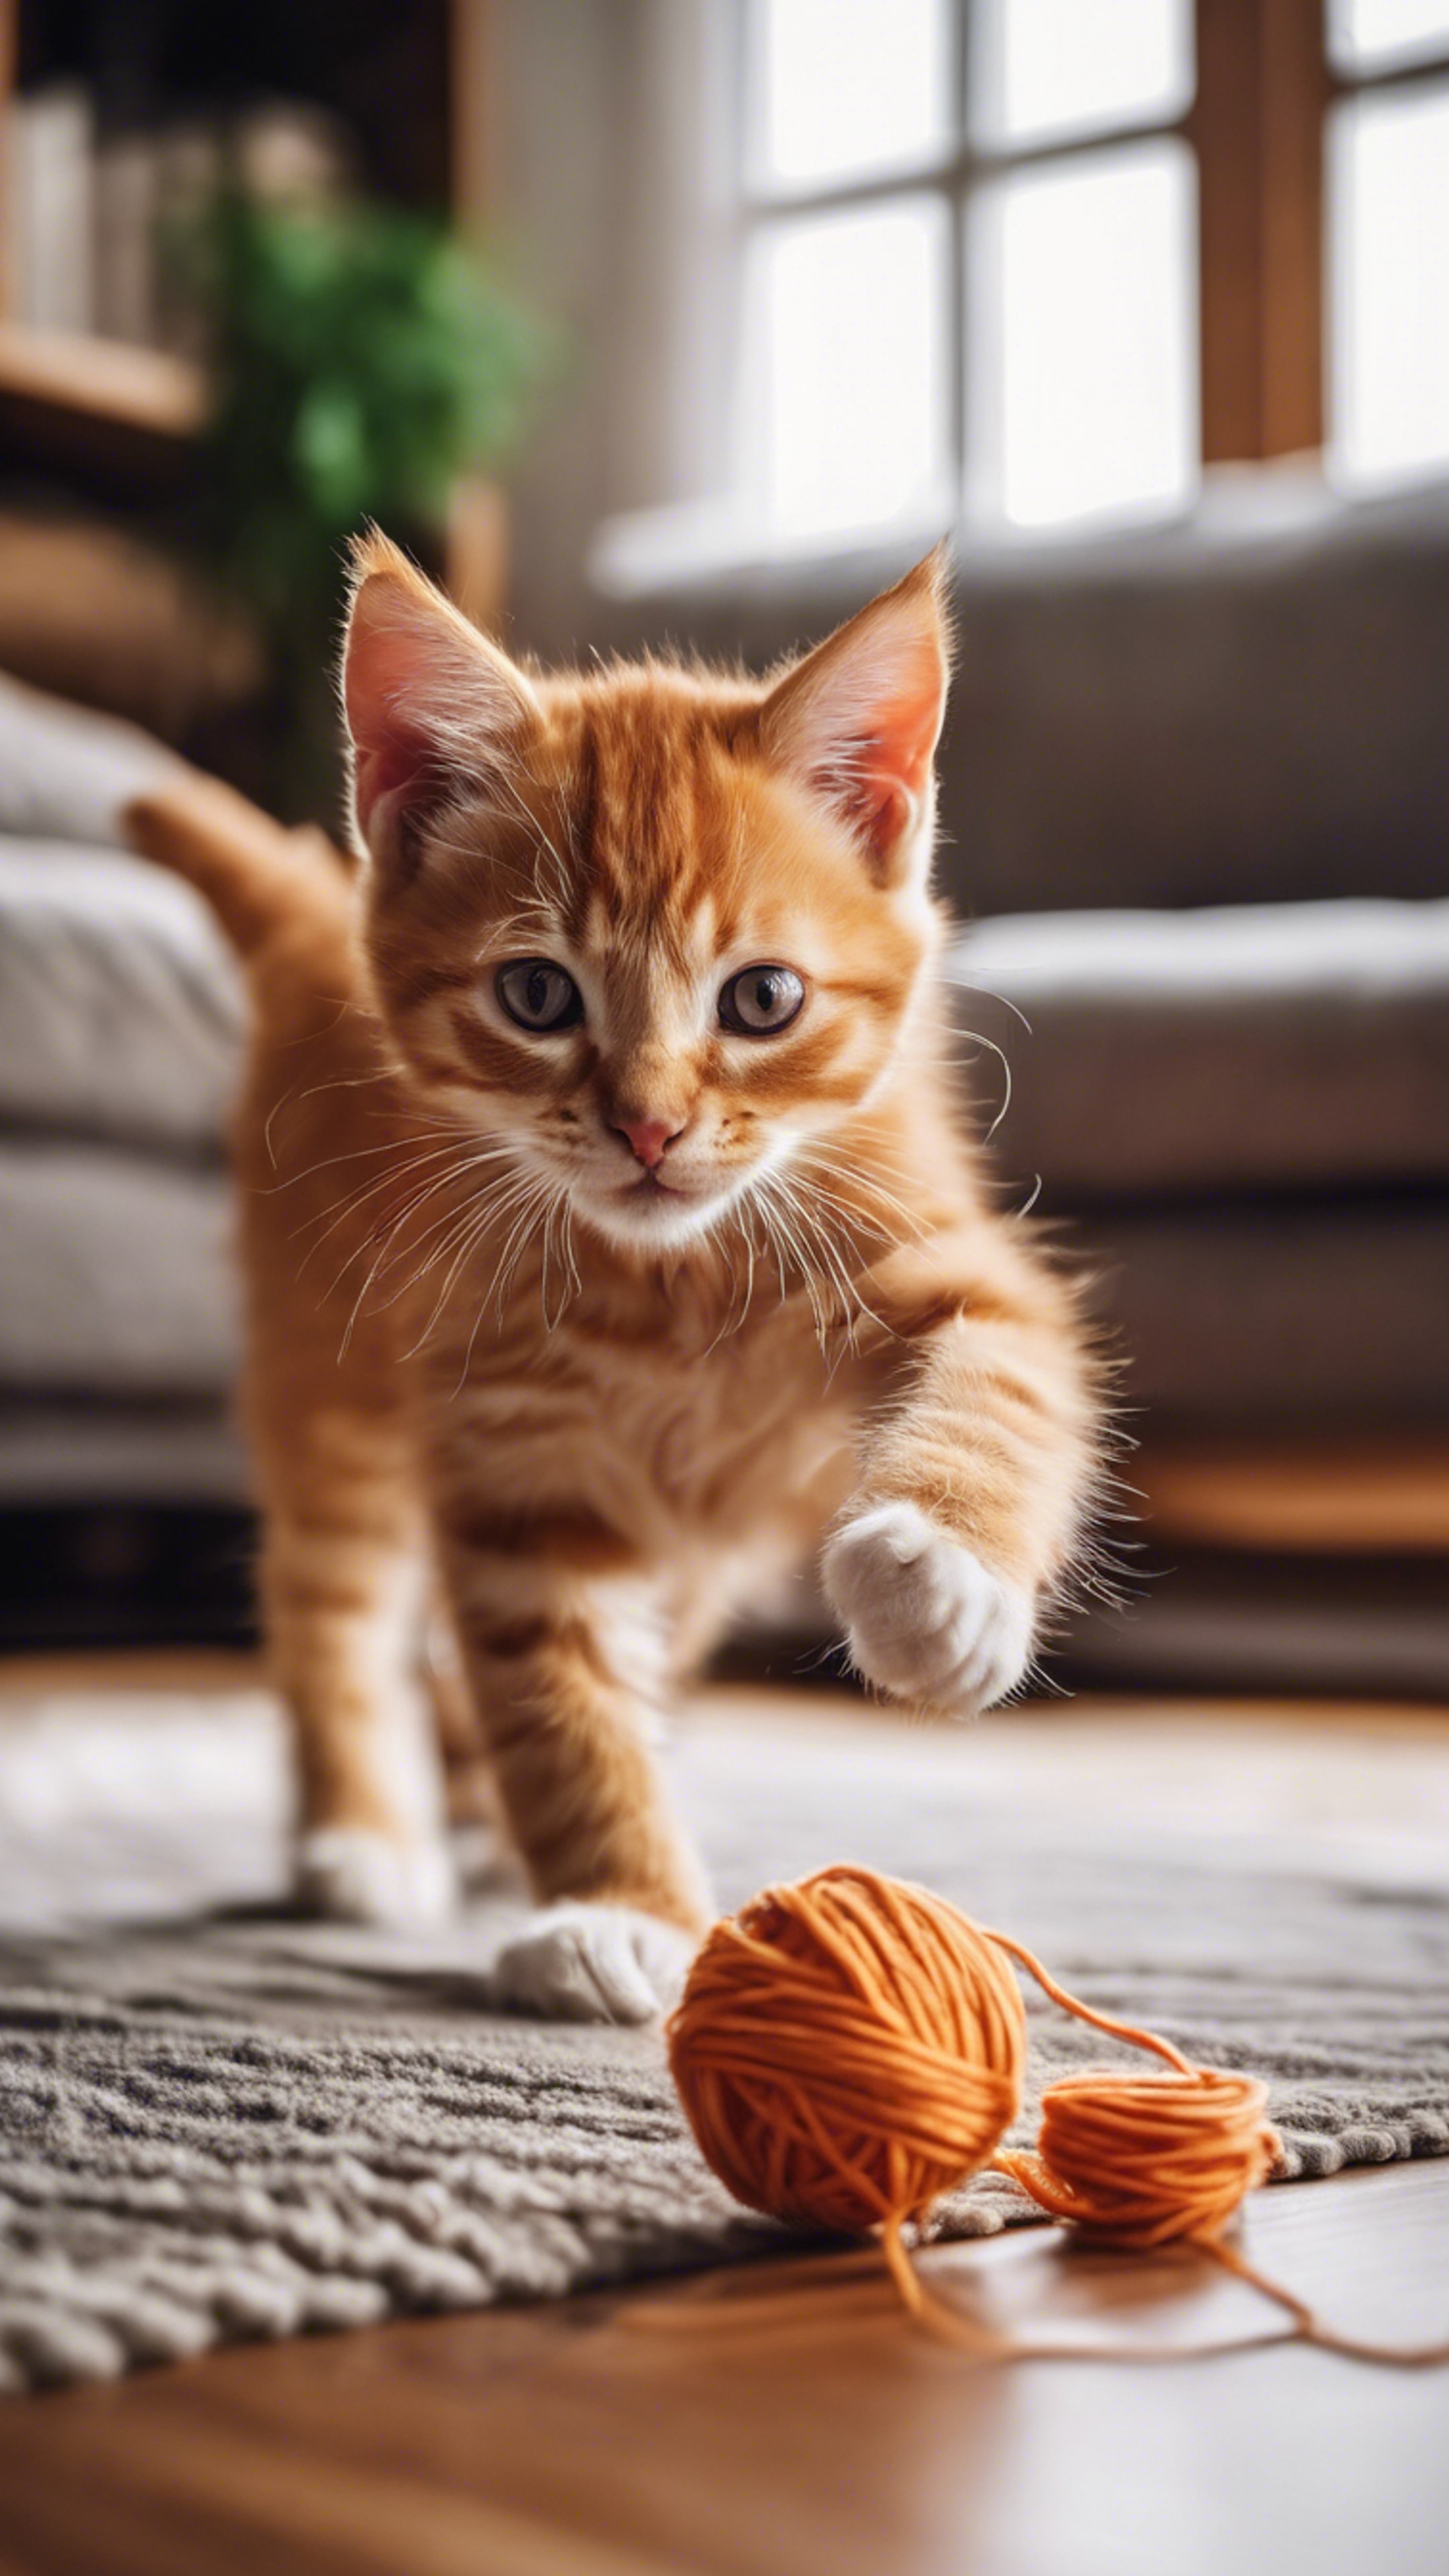 A playful orange tabby kitten, chasing a ball of yarn in a cozy wooden living room. Wallpaper[48ba56b3f1554d3caaed]